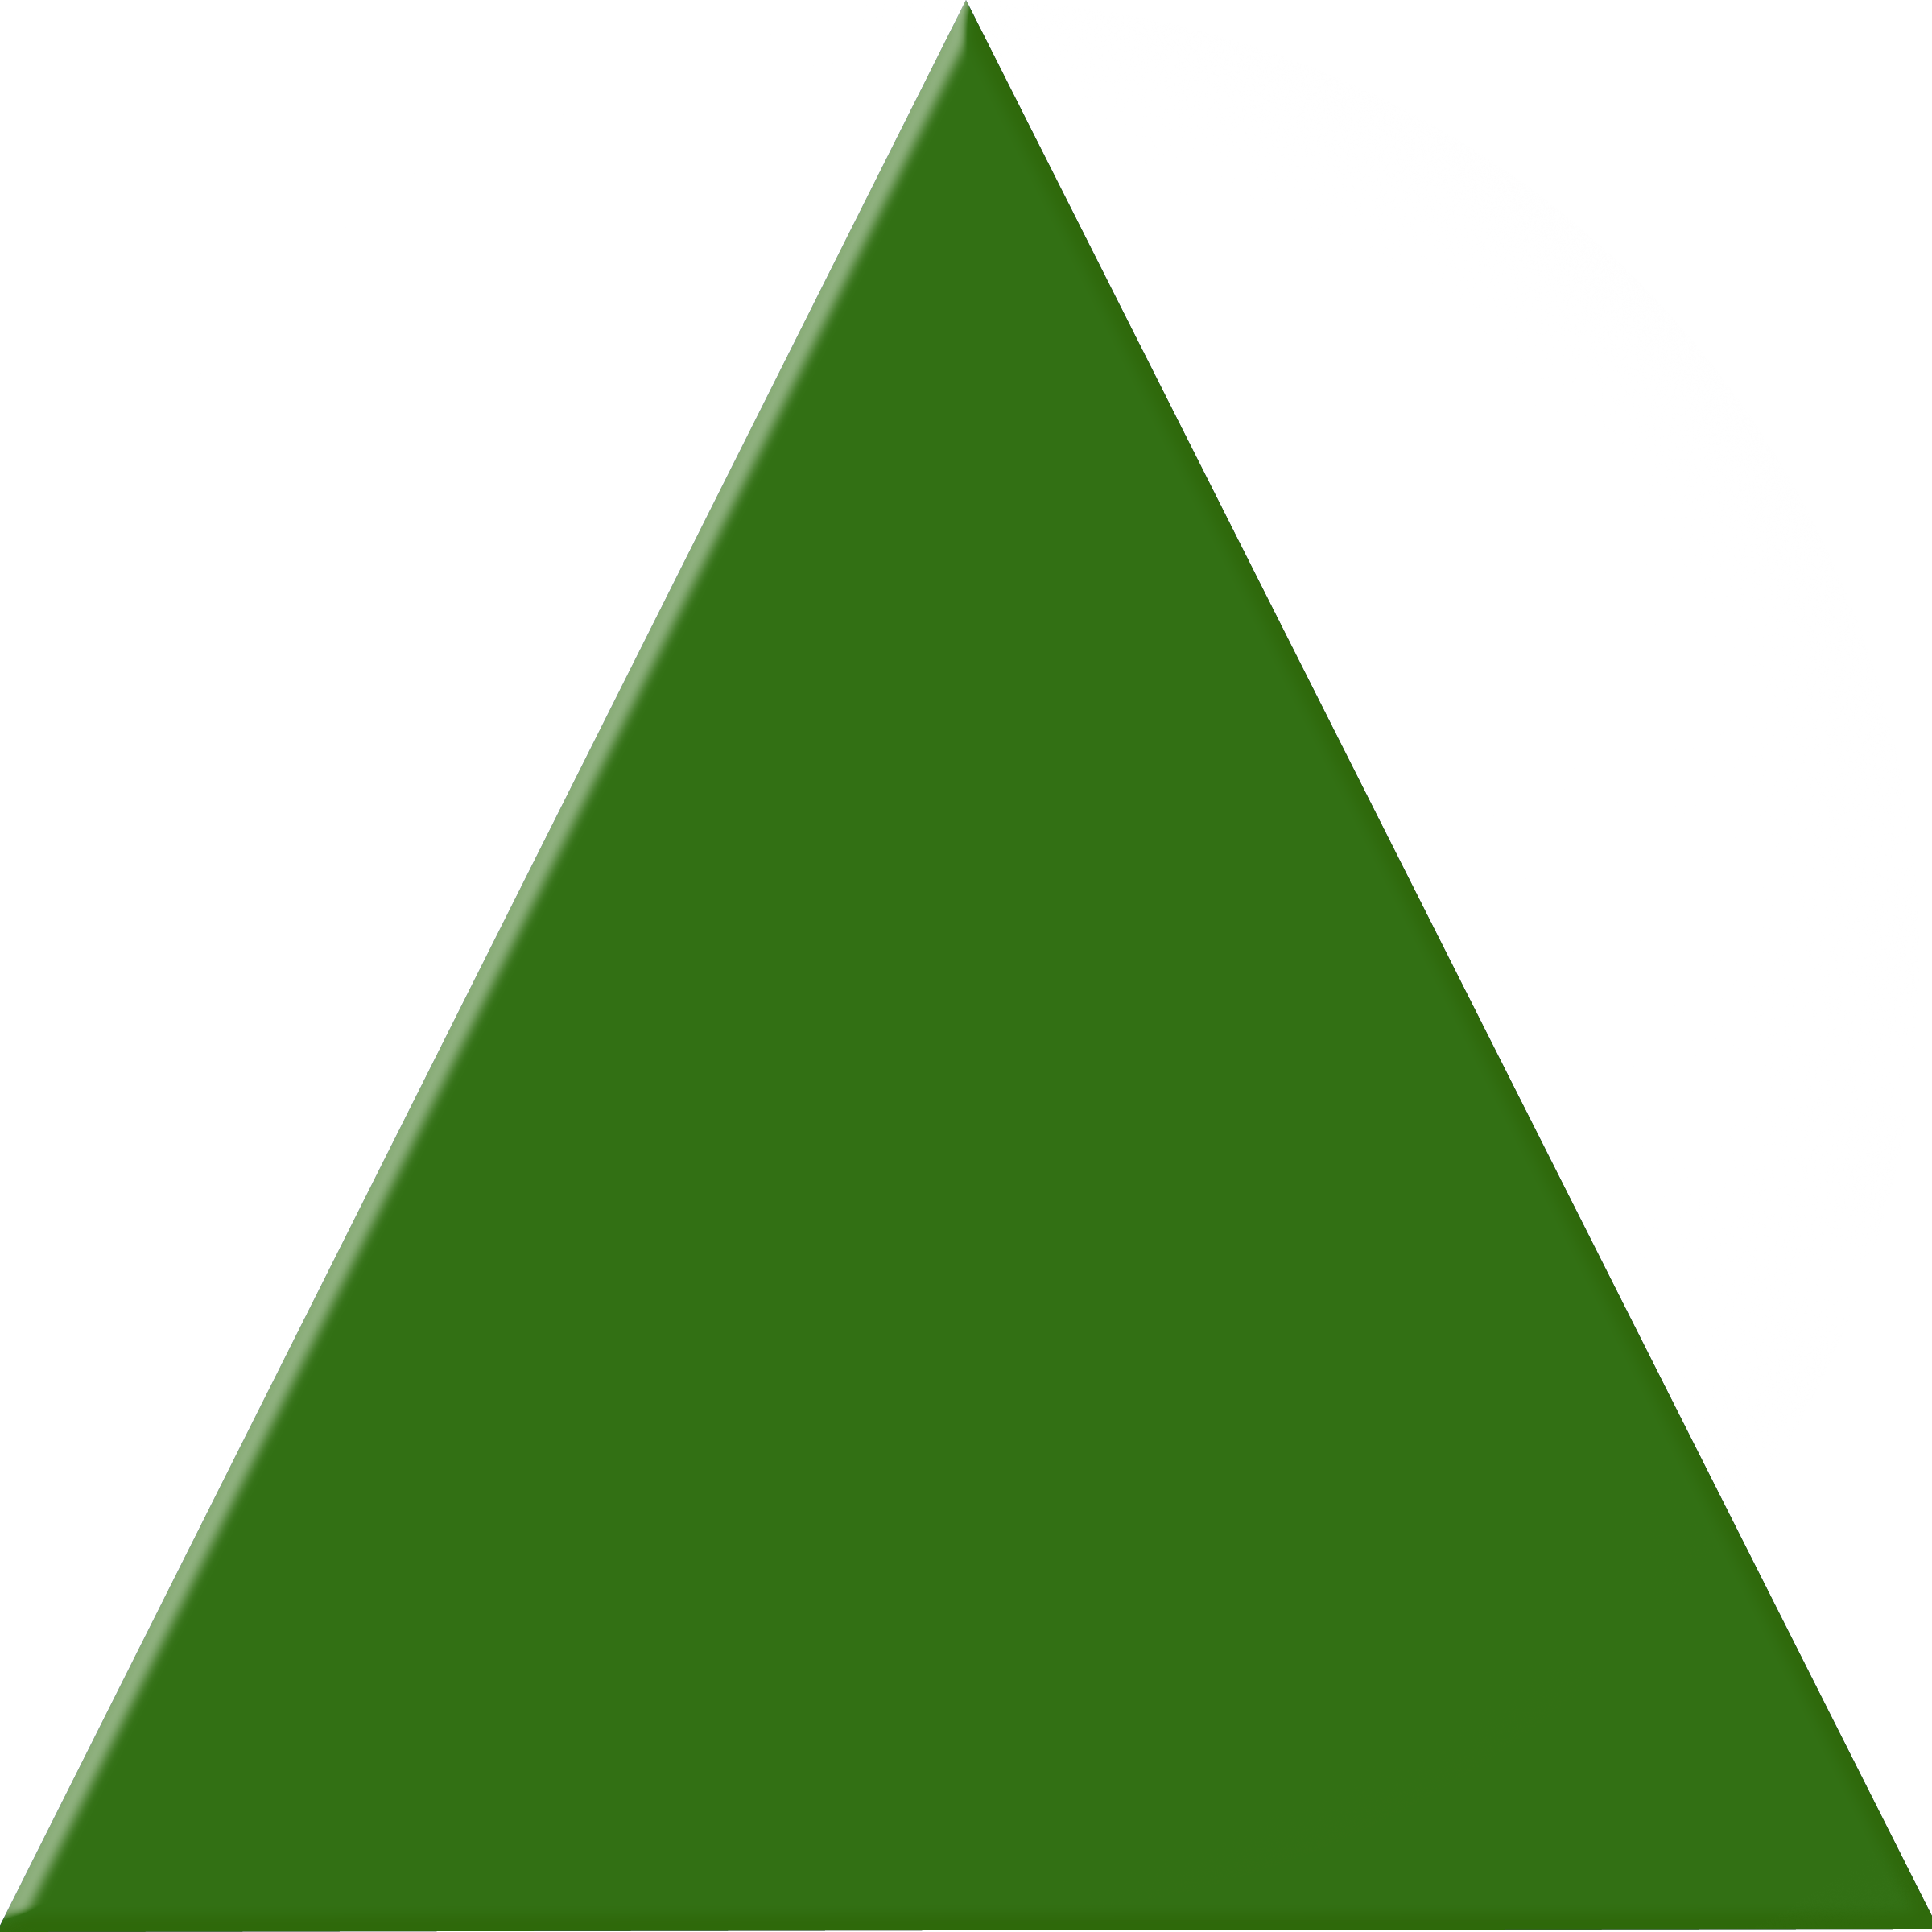 Green Triangle   Free Images At Clker Com   Vector Clip Art Online    